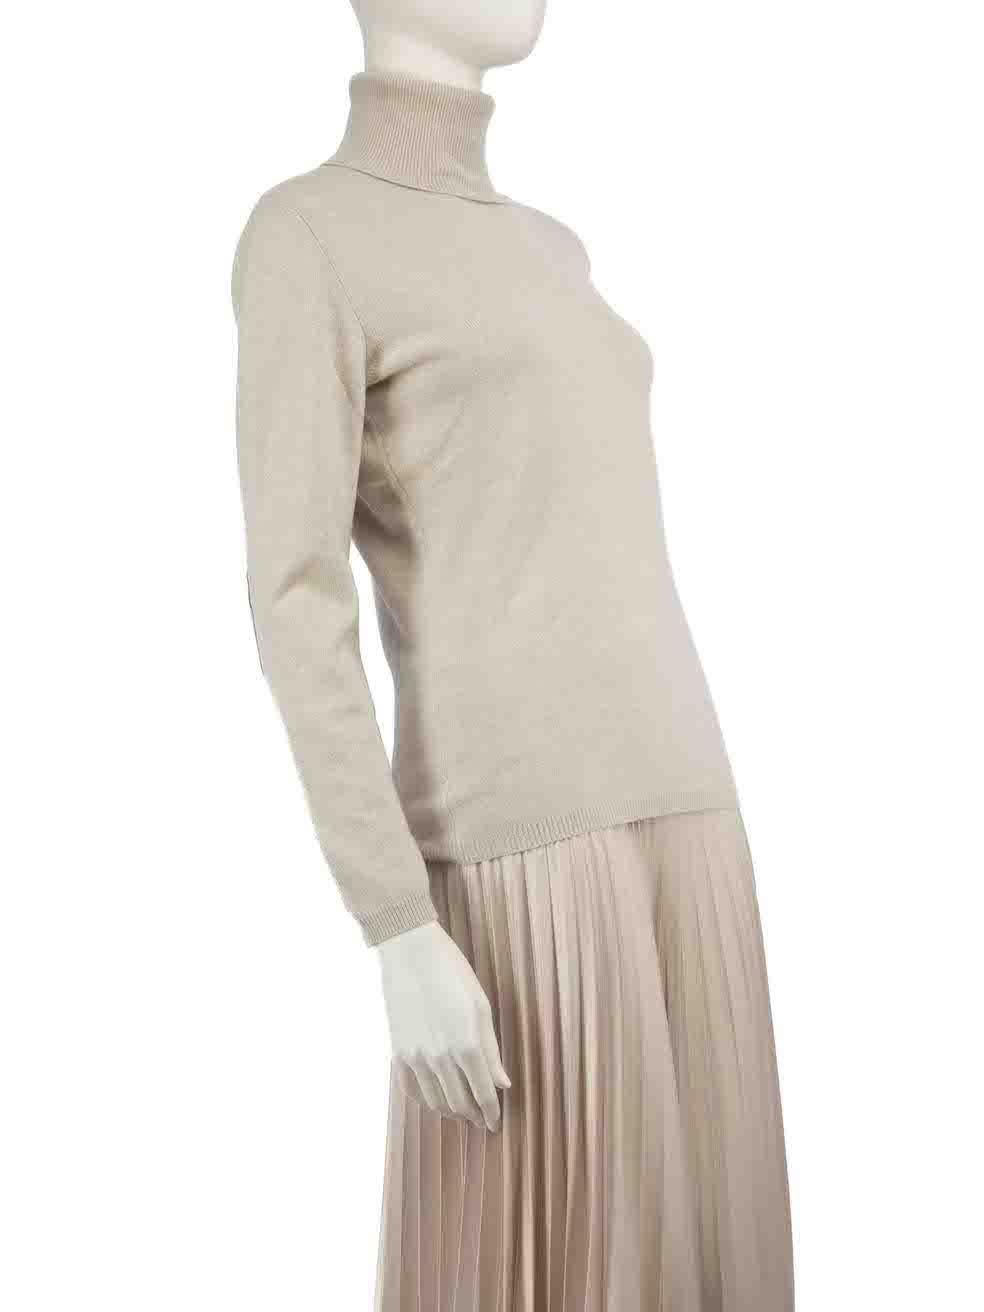 CONDITION is Very good. Hardly any visible wear to jumper is evident on this used Fabiana Filippi designer resale item.
 
 
 
 Details
 
 
 Grey
 
 Wool
 
 Long sleeves jumper
 
 Knitted and stretchy
 
 Turtlneck
 
 Suede elbow patch detail
 
 
 
 
